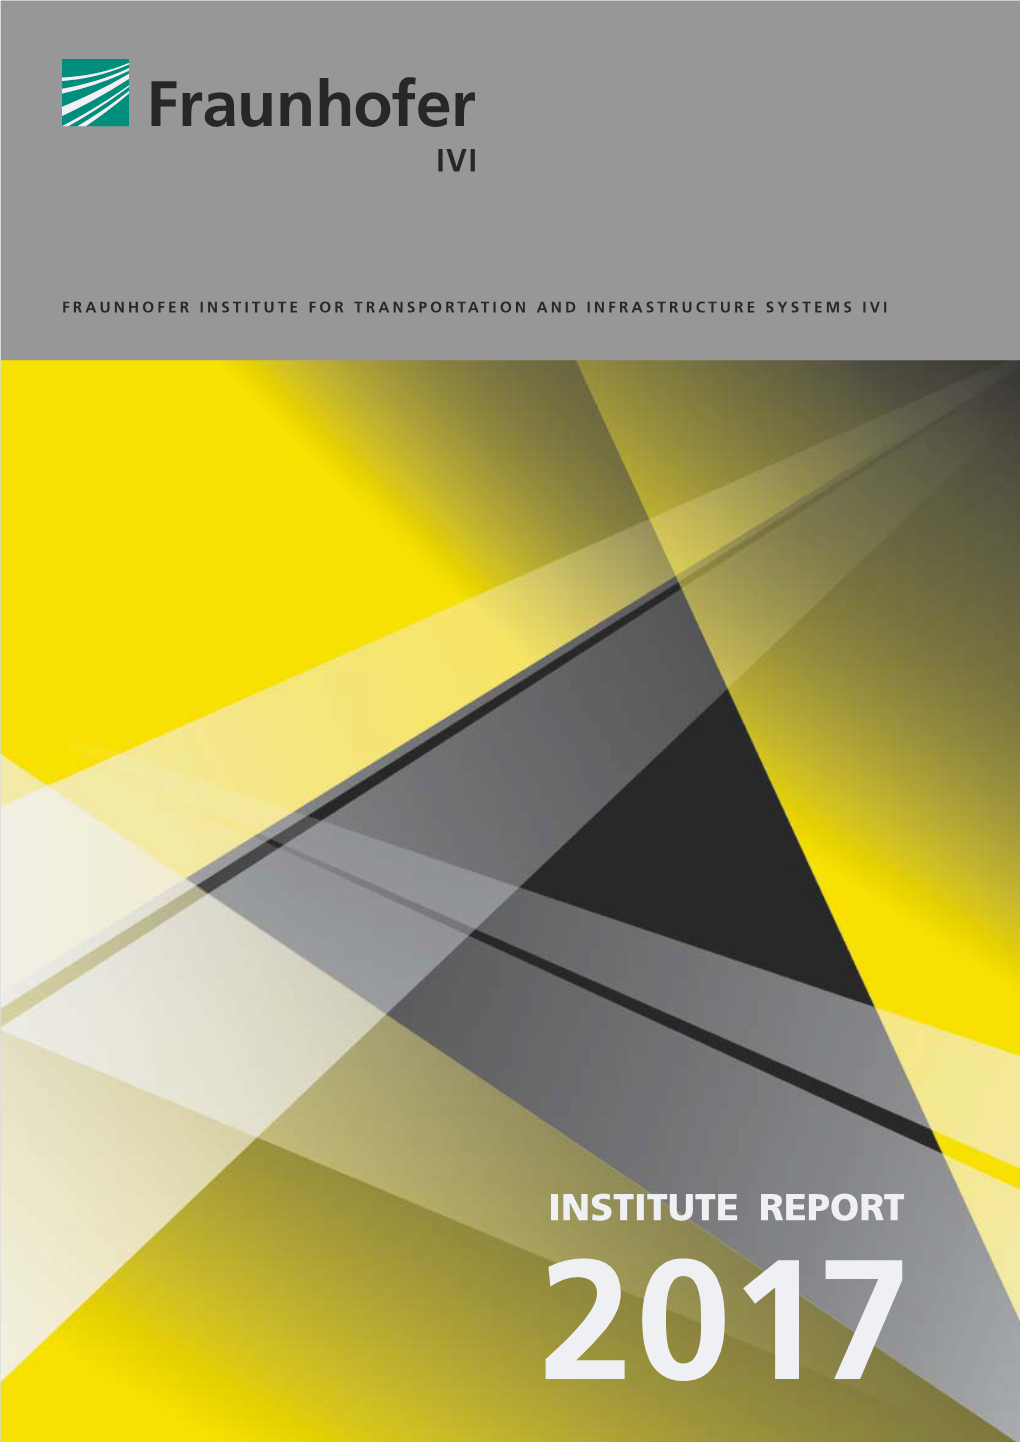 Institute Report 2017 Fraunhofer Institute for Transportation and Infrastructure Systems Ivi